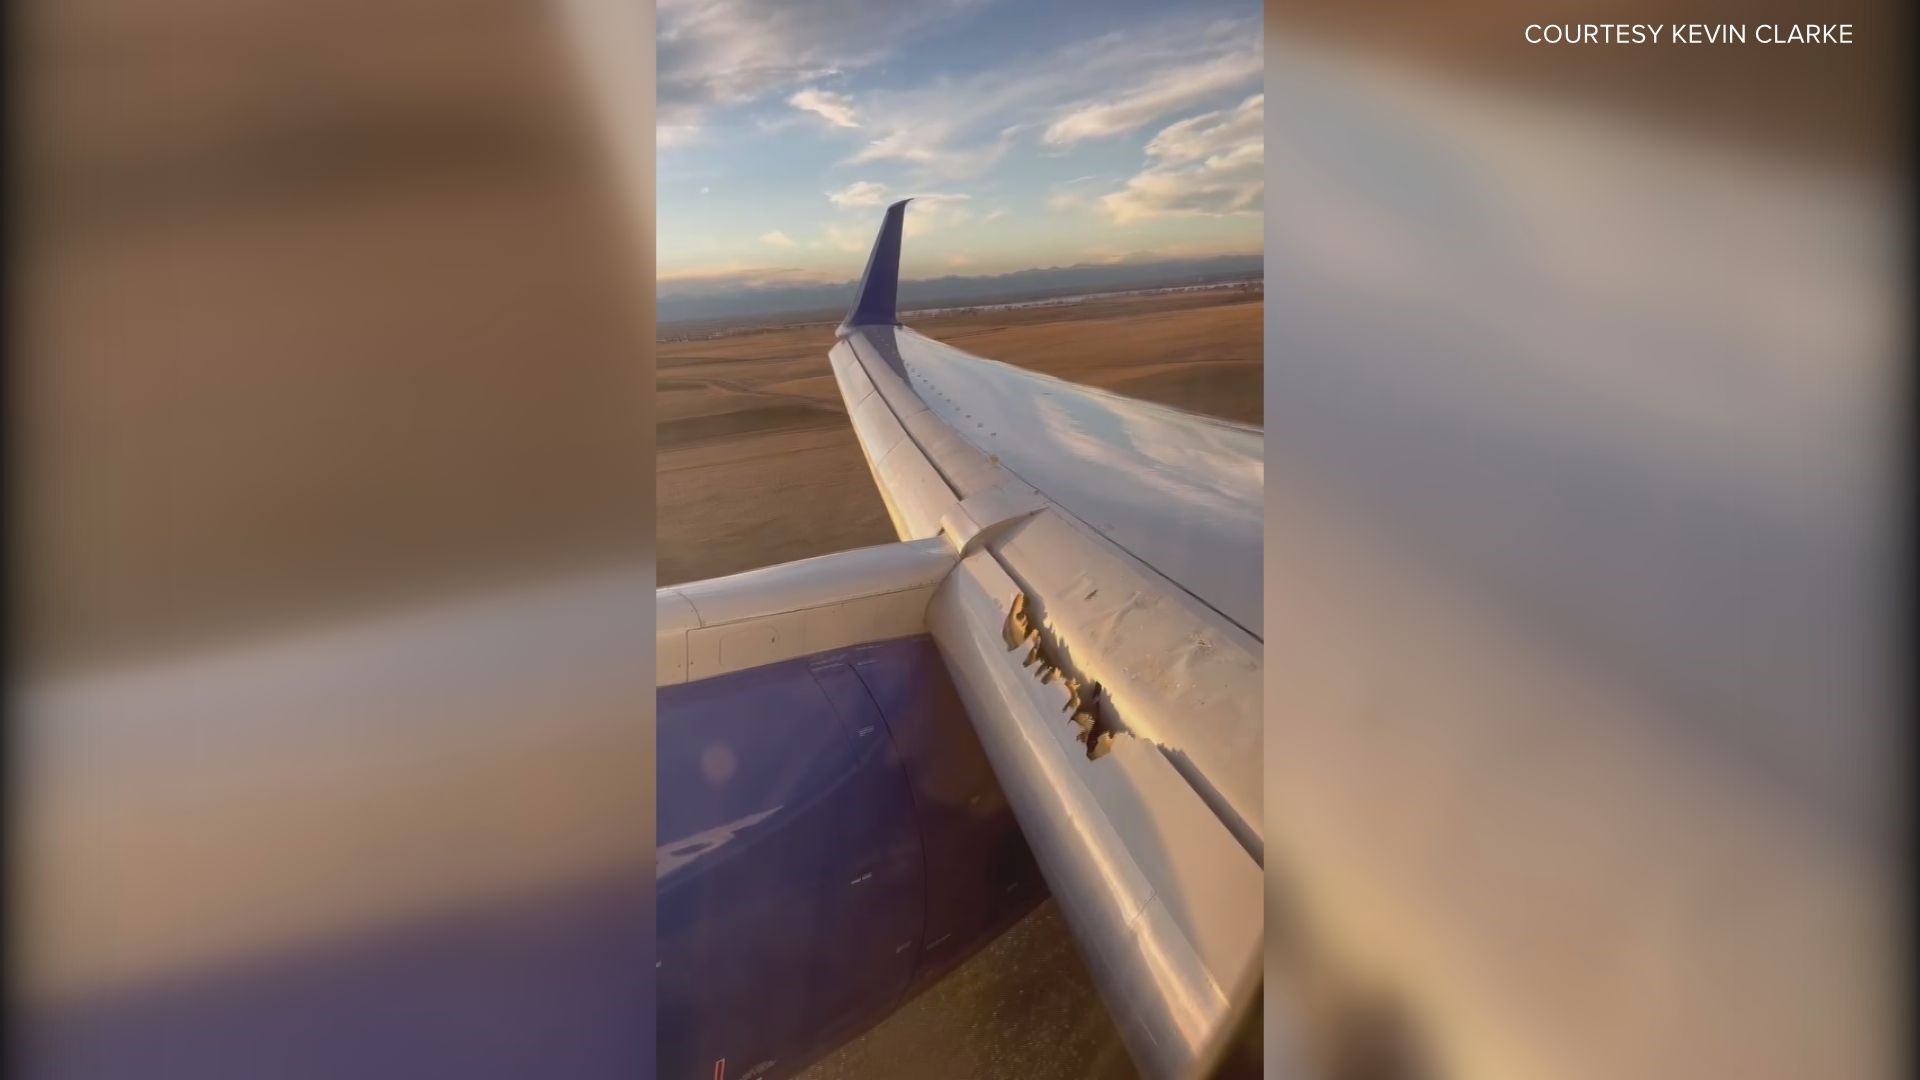 Videos from a passenger on board shows the damaged wing slat that caused the Boston-bound flight to make a landing in Denver.